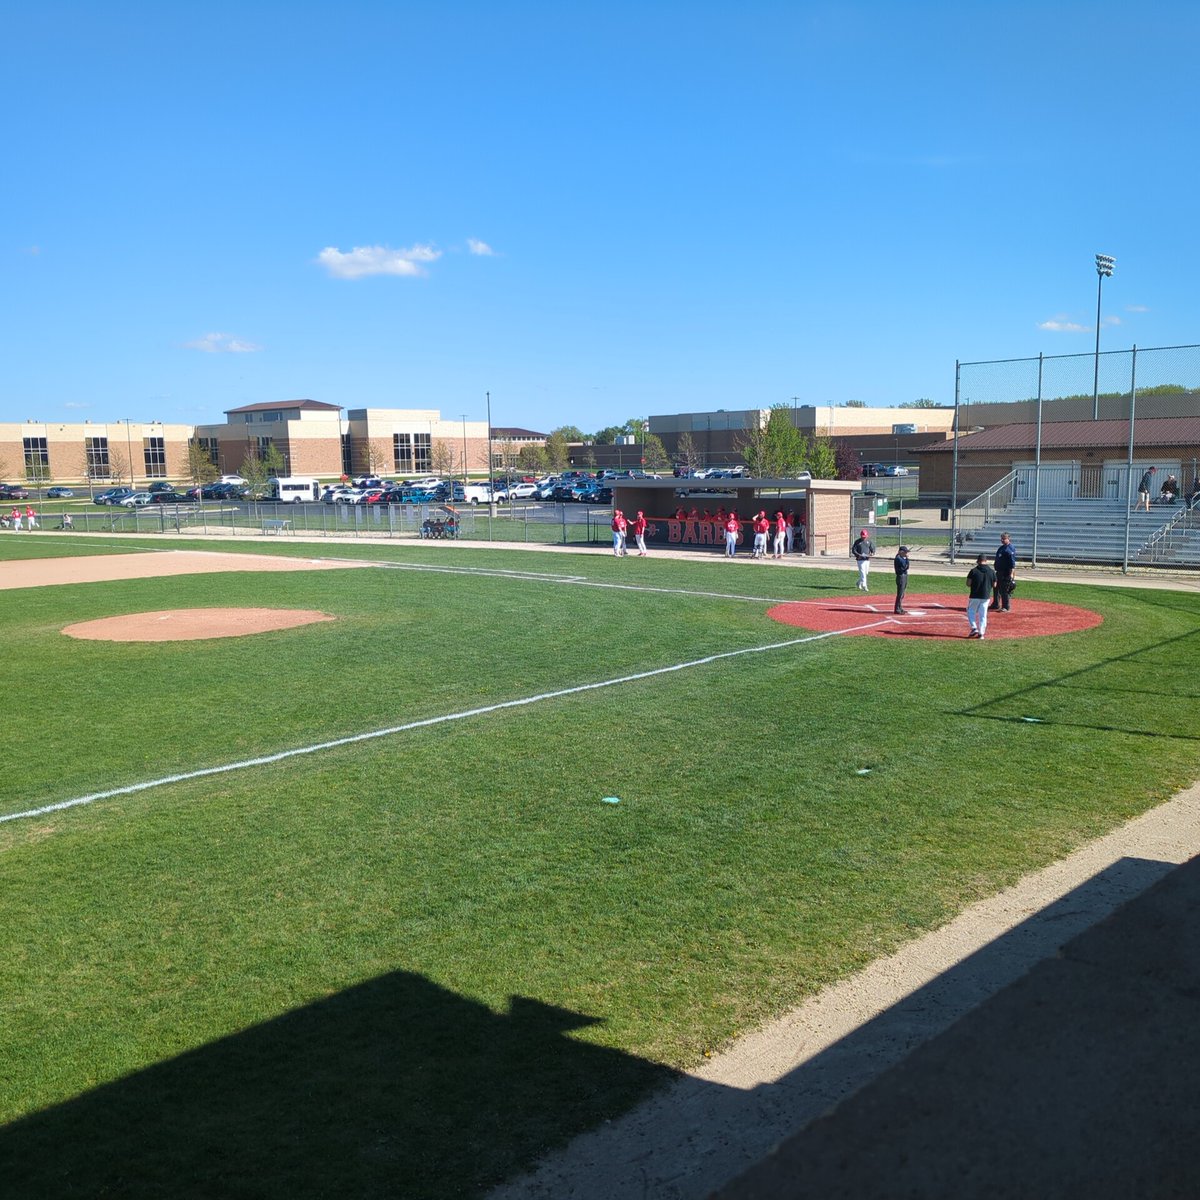 DeKalb lost the continuation of yesterdays game, 9-8 in 9.

Game 2 of the series starts soon vs. Naperville Central